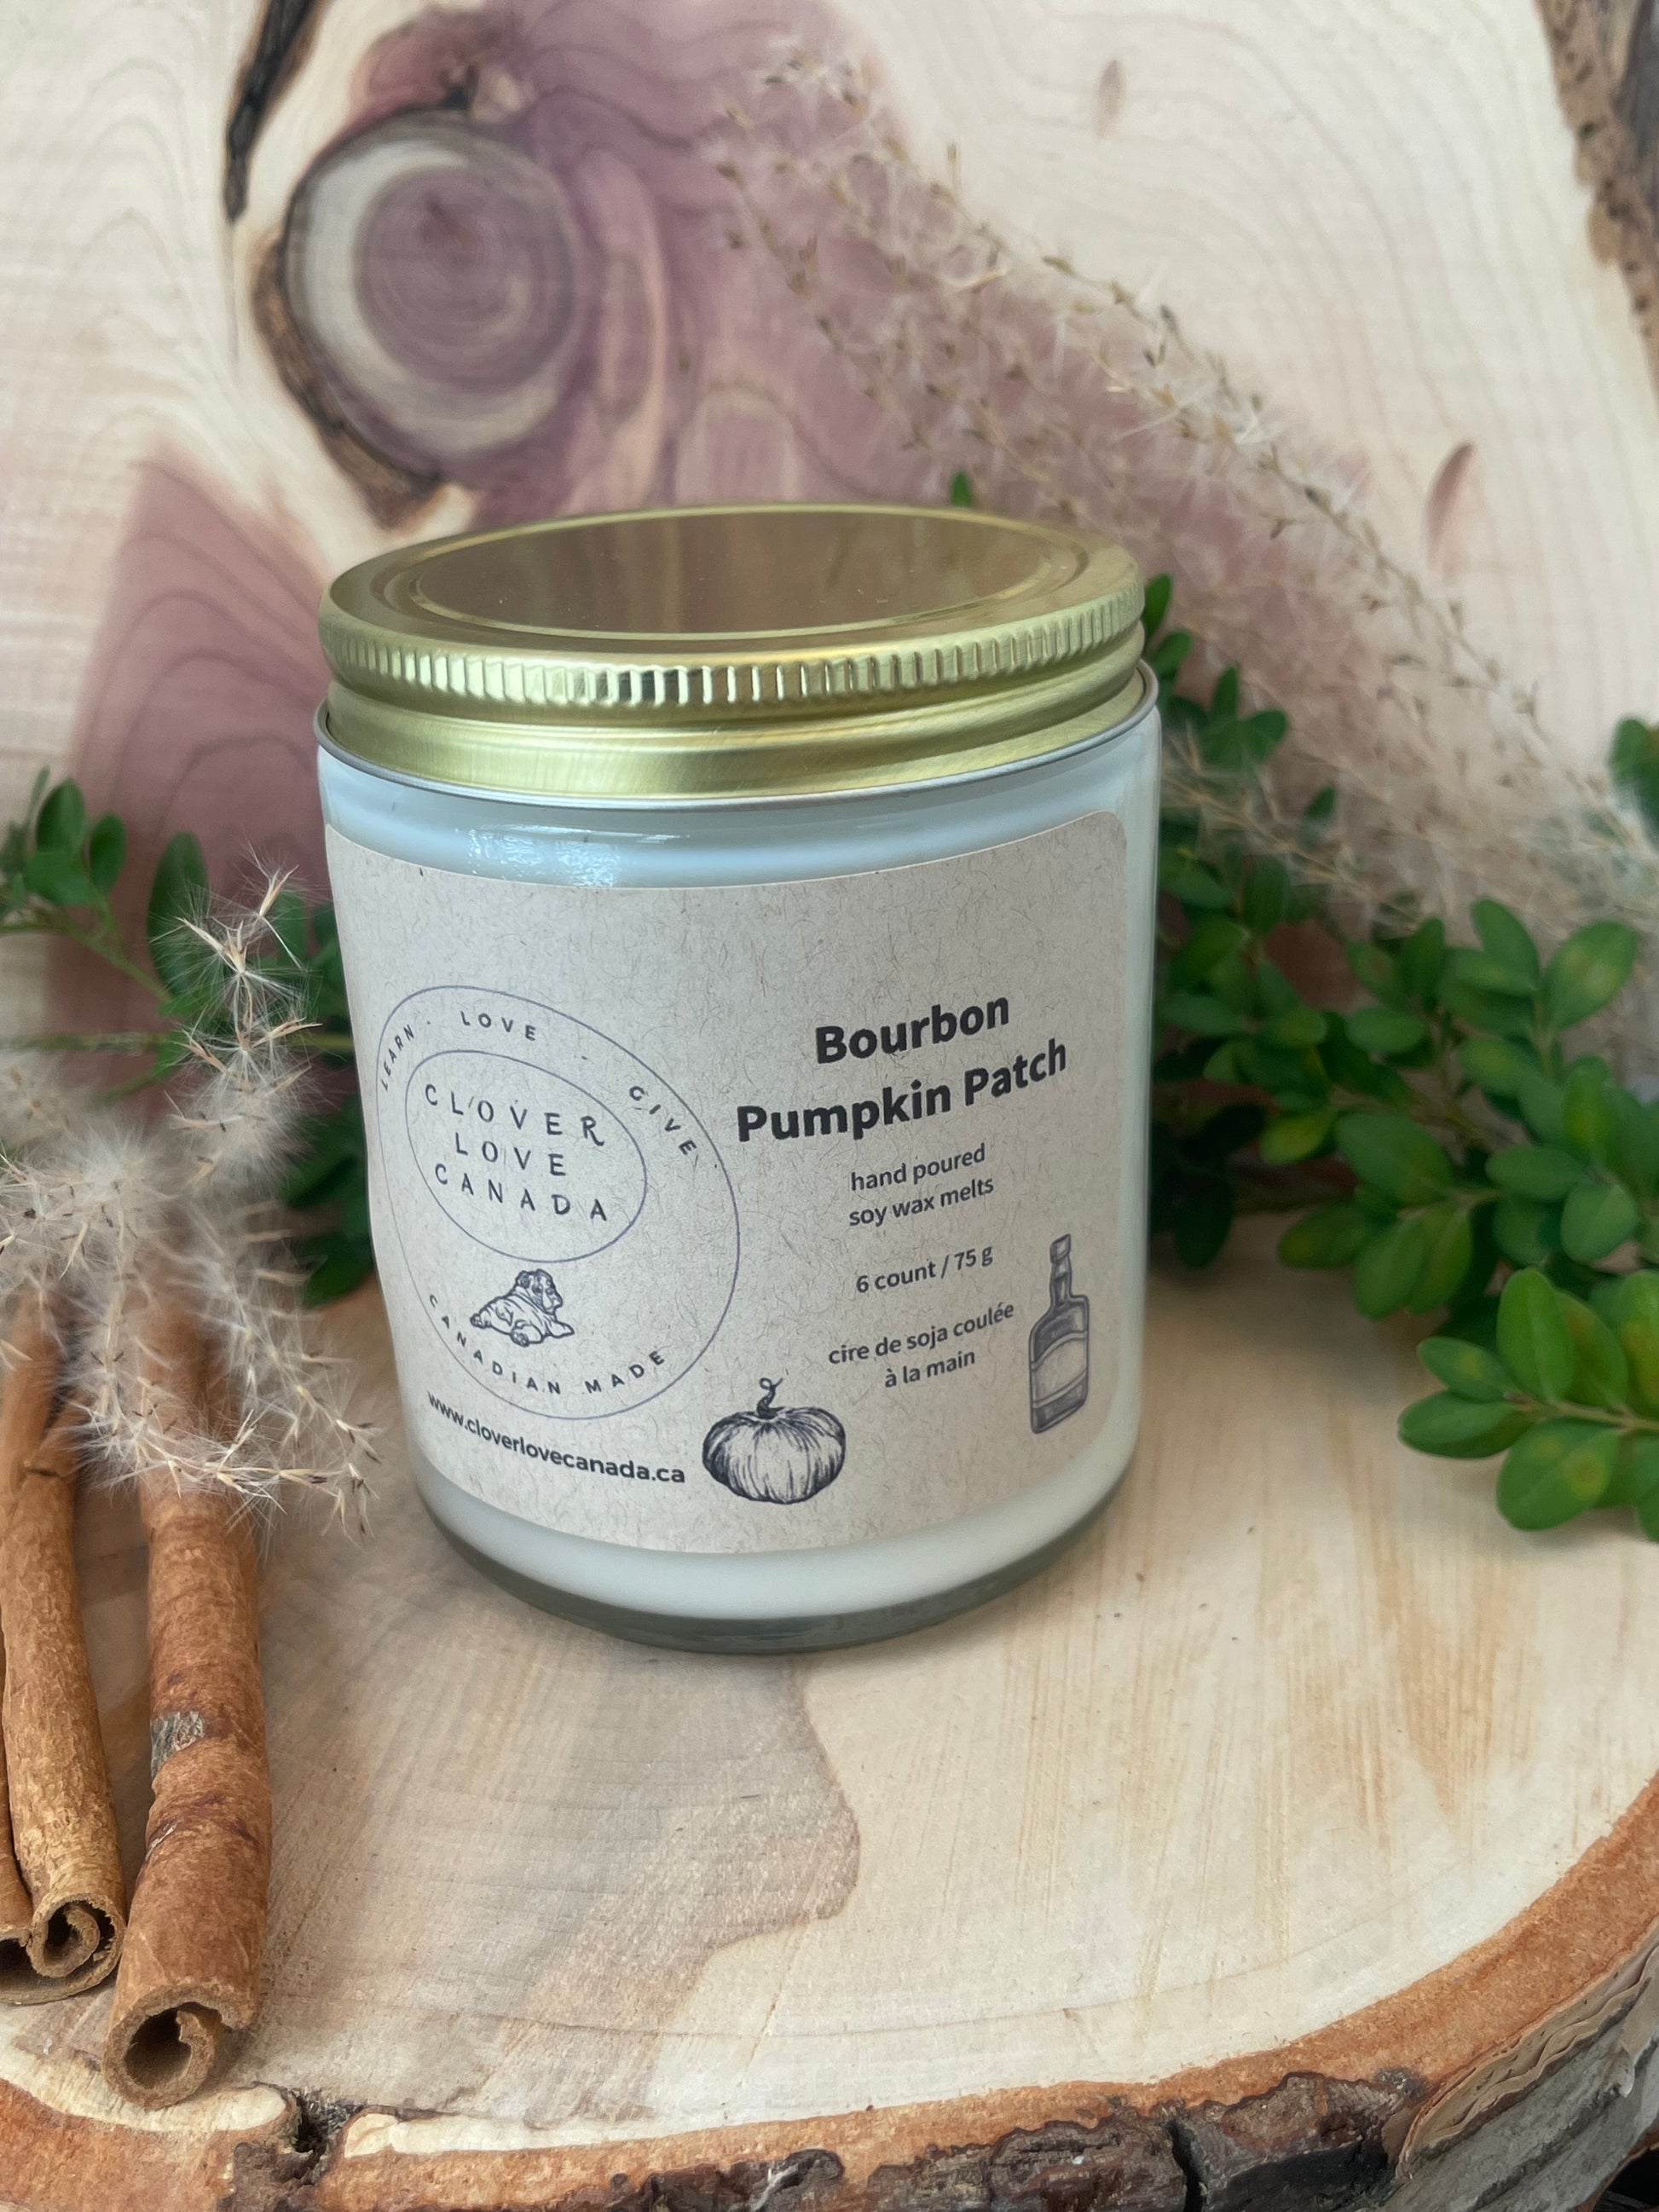 Bourbon Pumpkin Patch Hand Poured Soy Scented Candle 8 oz on birch wood slice 